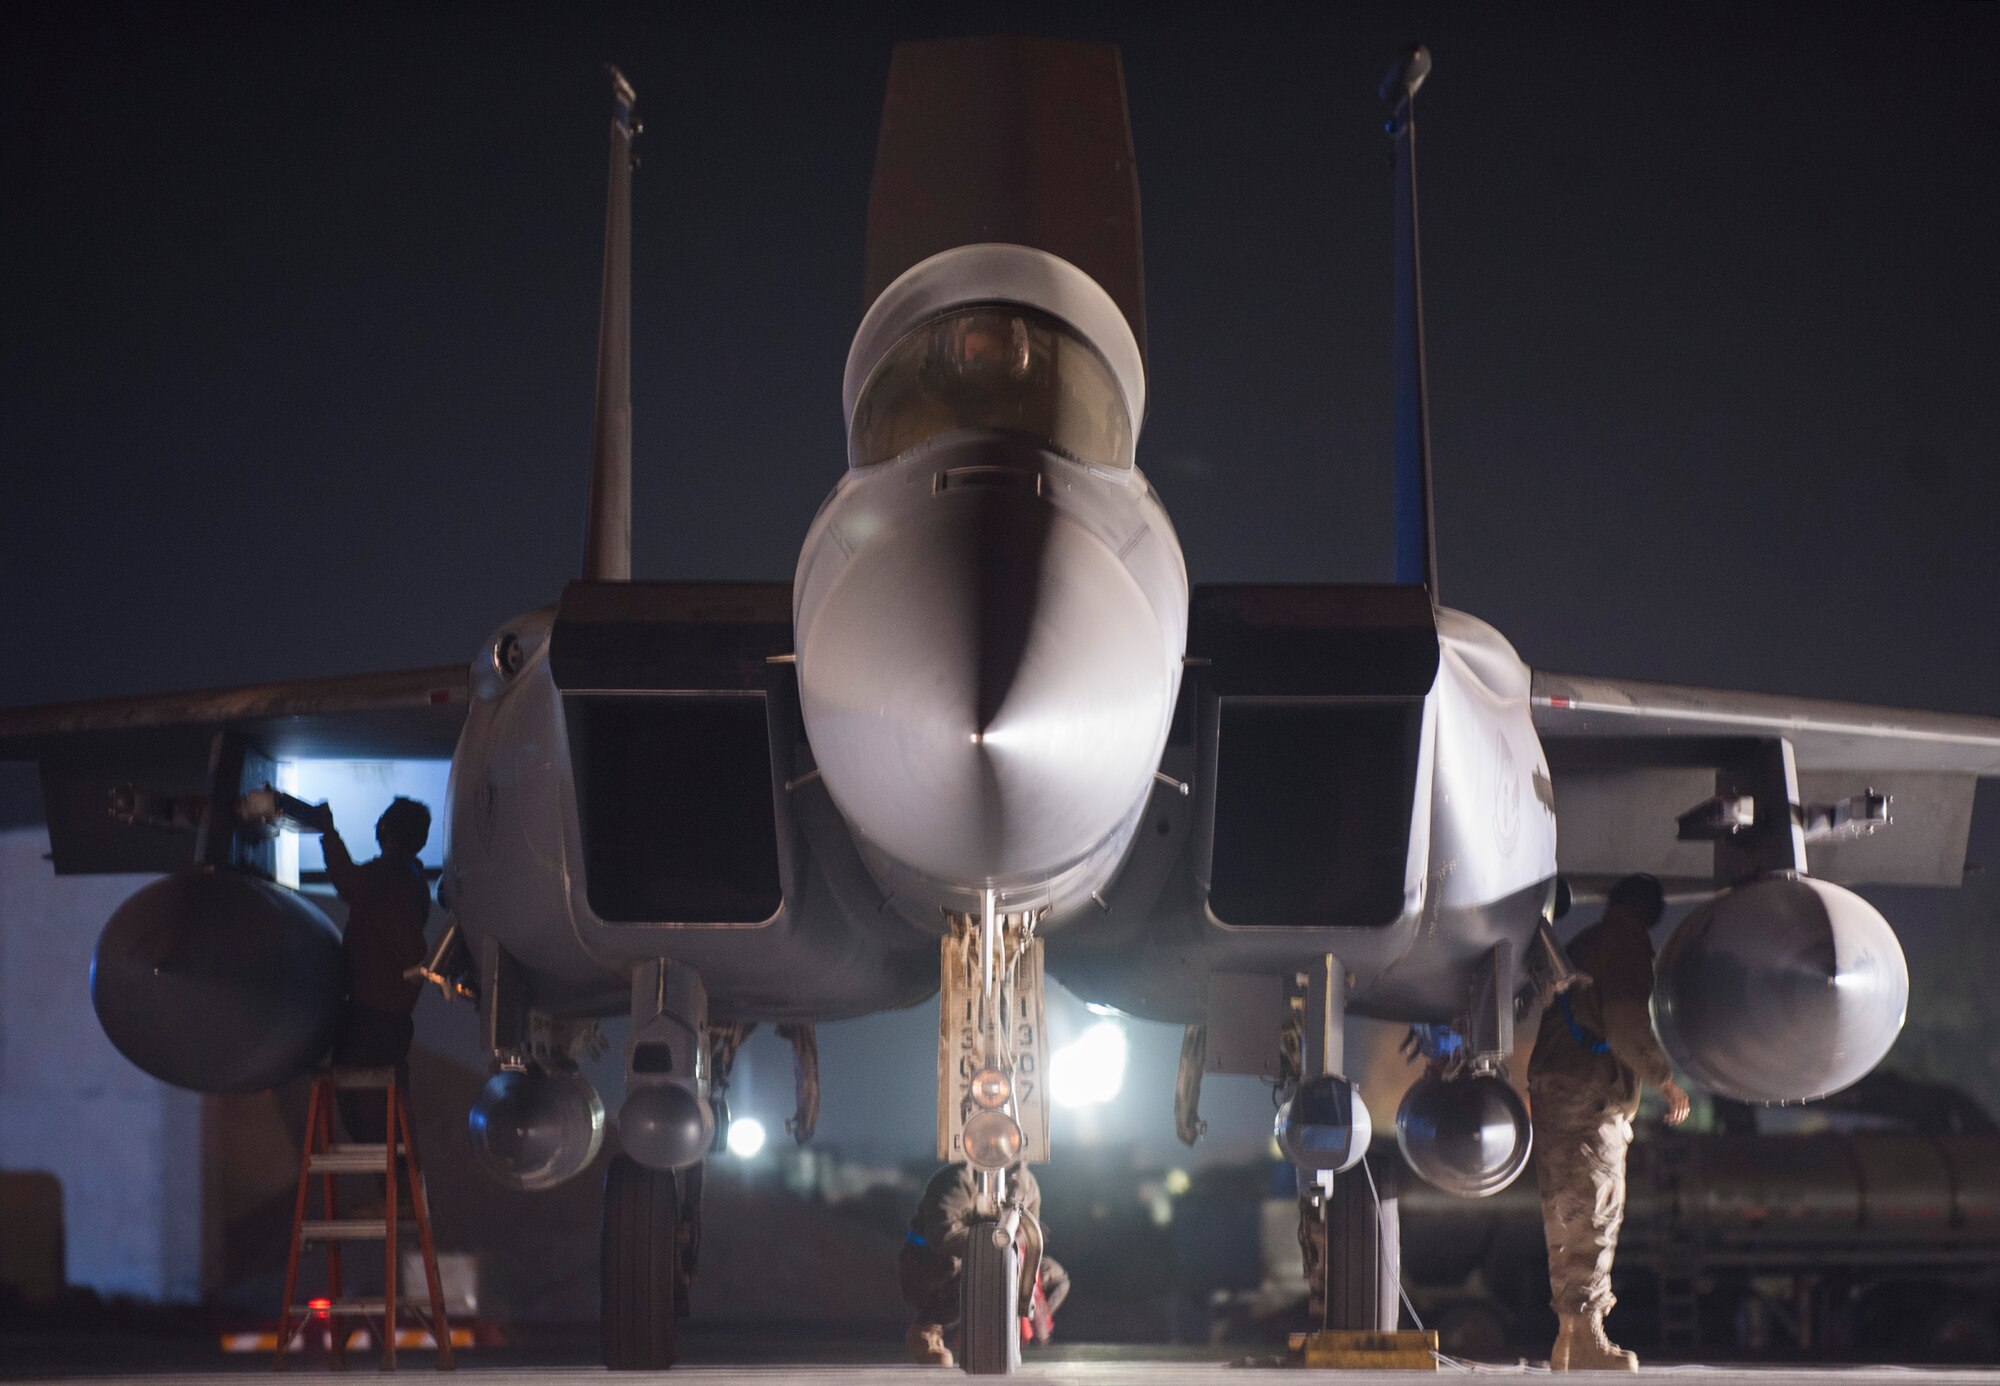 Aircraft maintainers from the 332nd Expeditionary Maintenance Squadron perform pre-flight checks on an F-15E Strike Eagle prior to an early-morning takeoff October 4, 2017, at an undisclosed location in Southwest Asia. Maintenance Airmen work shifts around the clock ensuring aircraft are always available to provide overwatch for Coalition forces and strike targets in support of Operation Inherent Resolve.